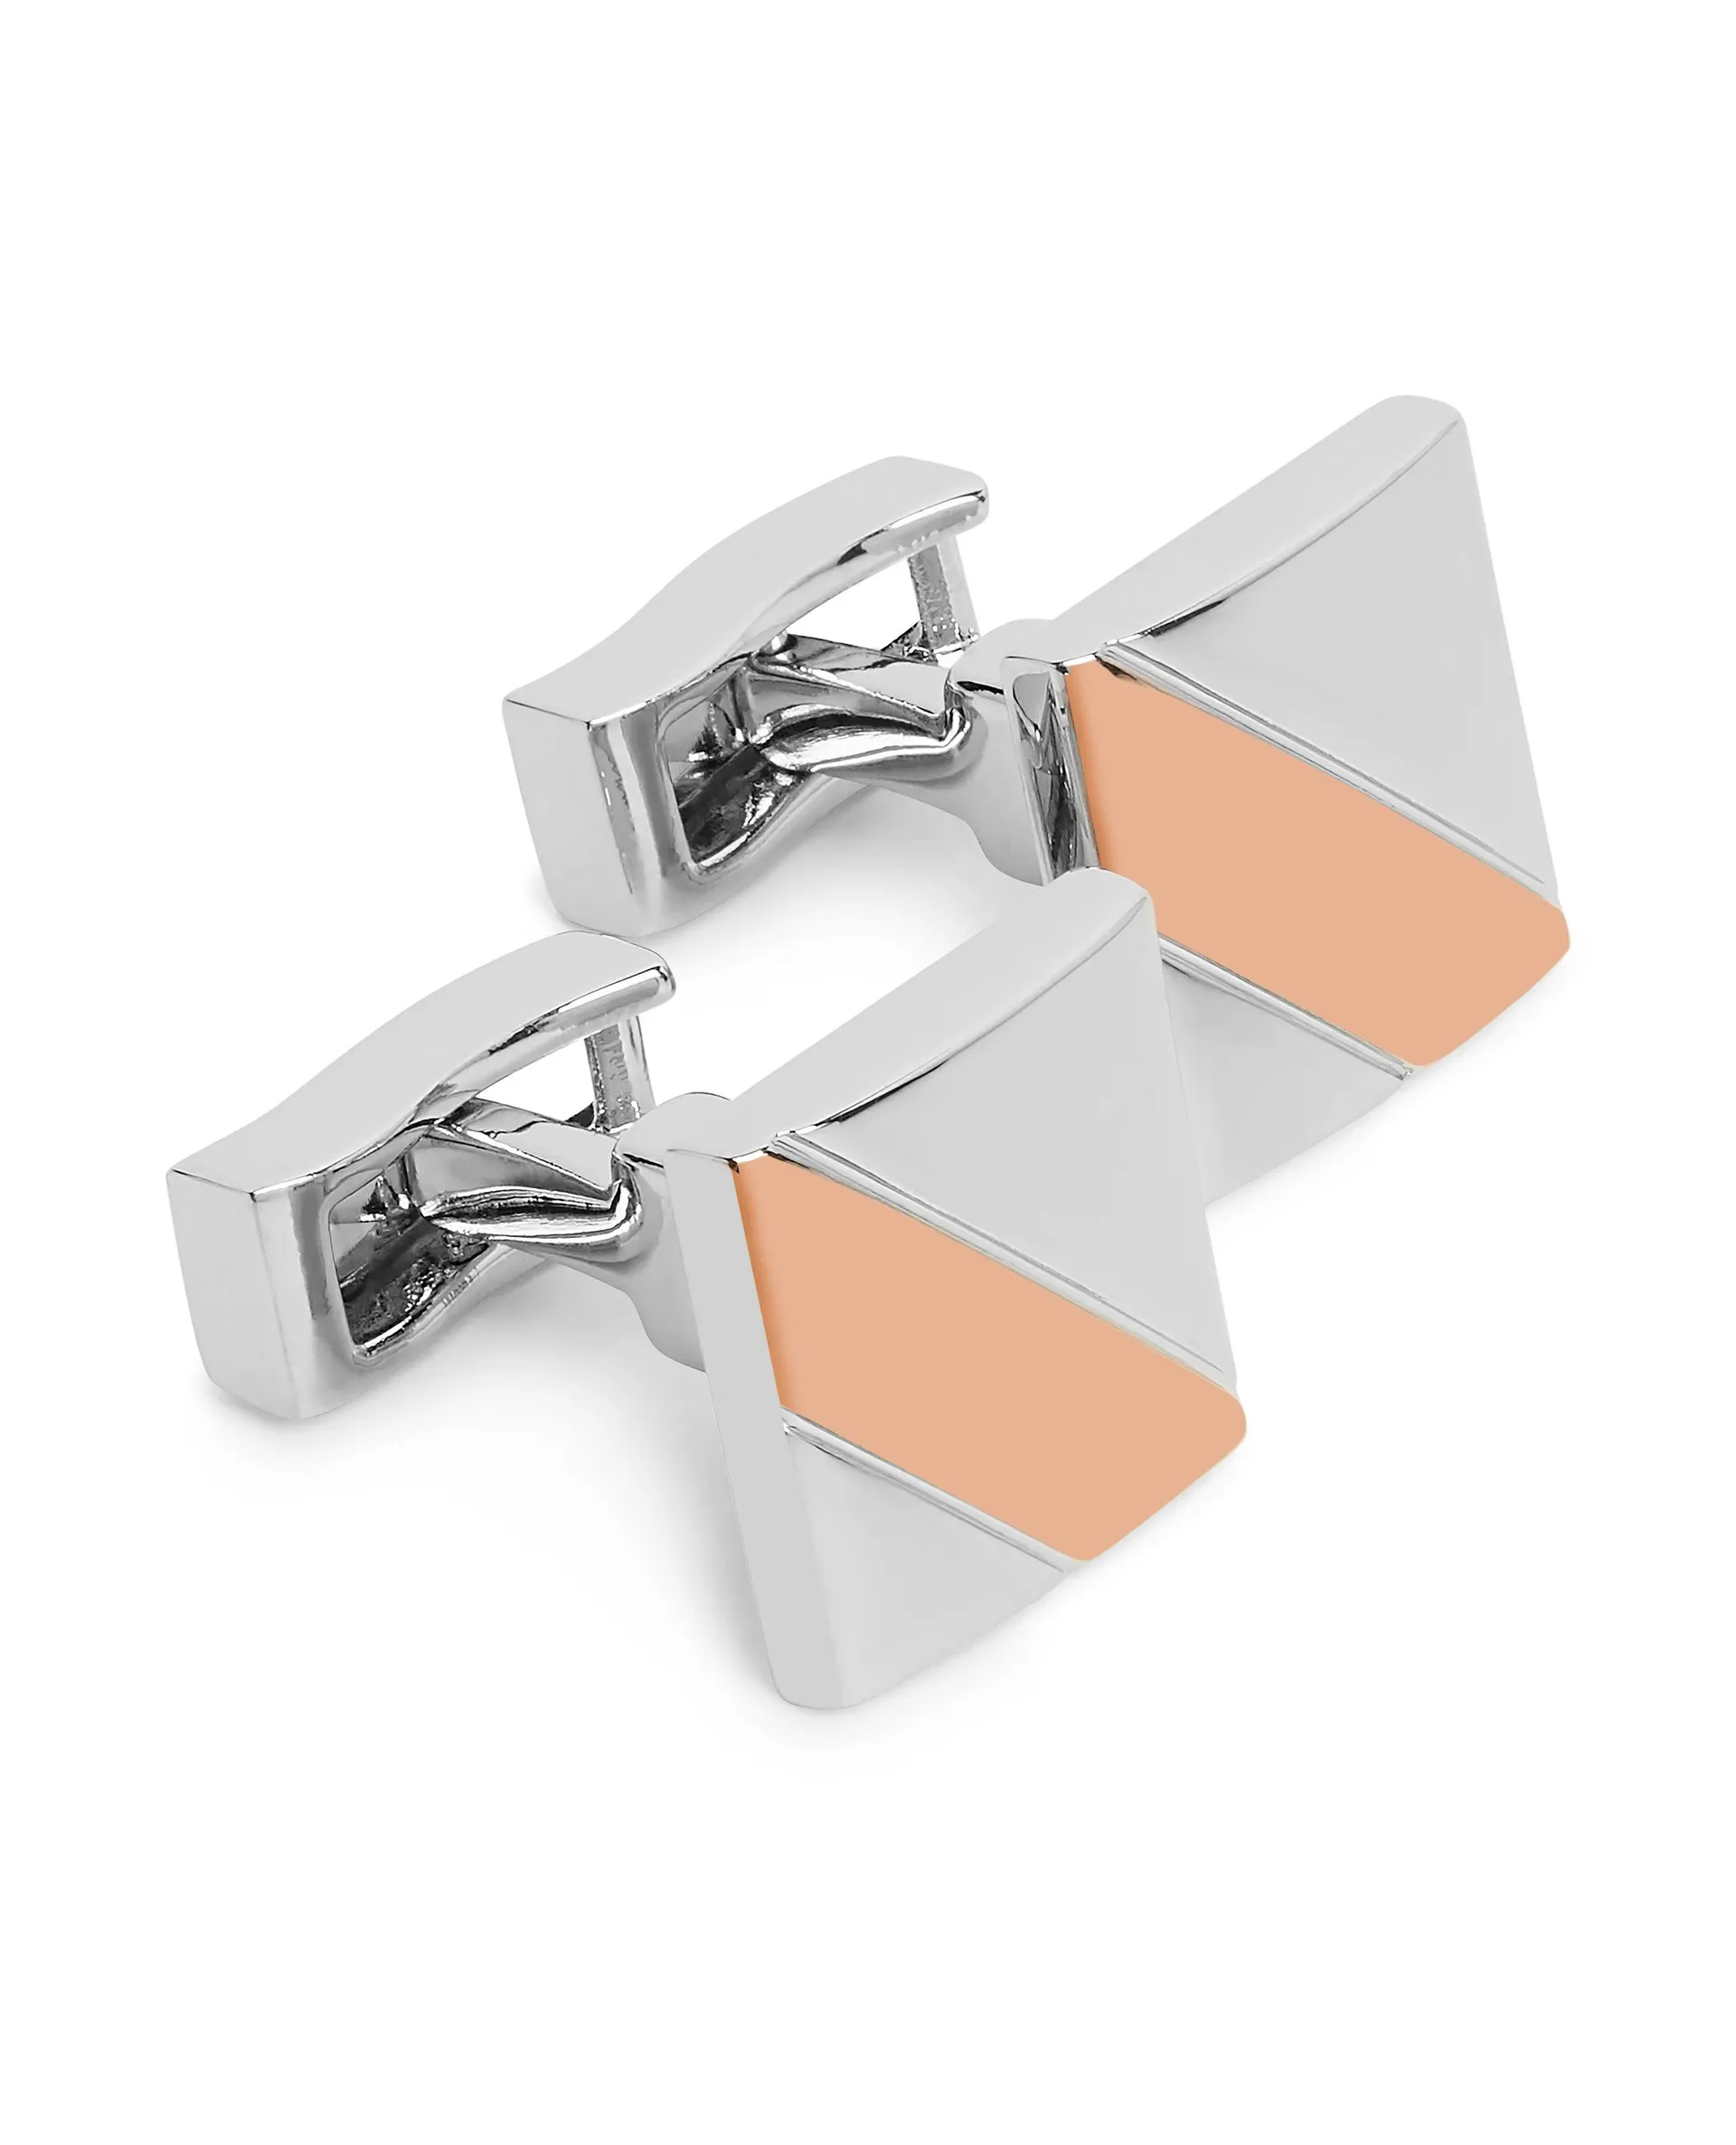 Silver and Rose Gold Square Cufflinks